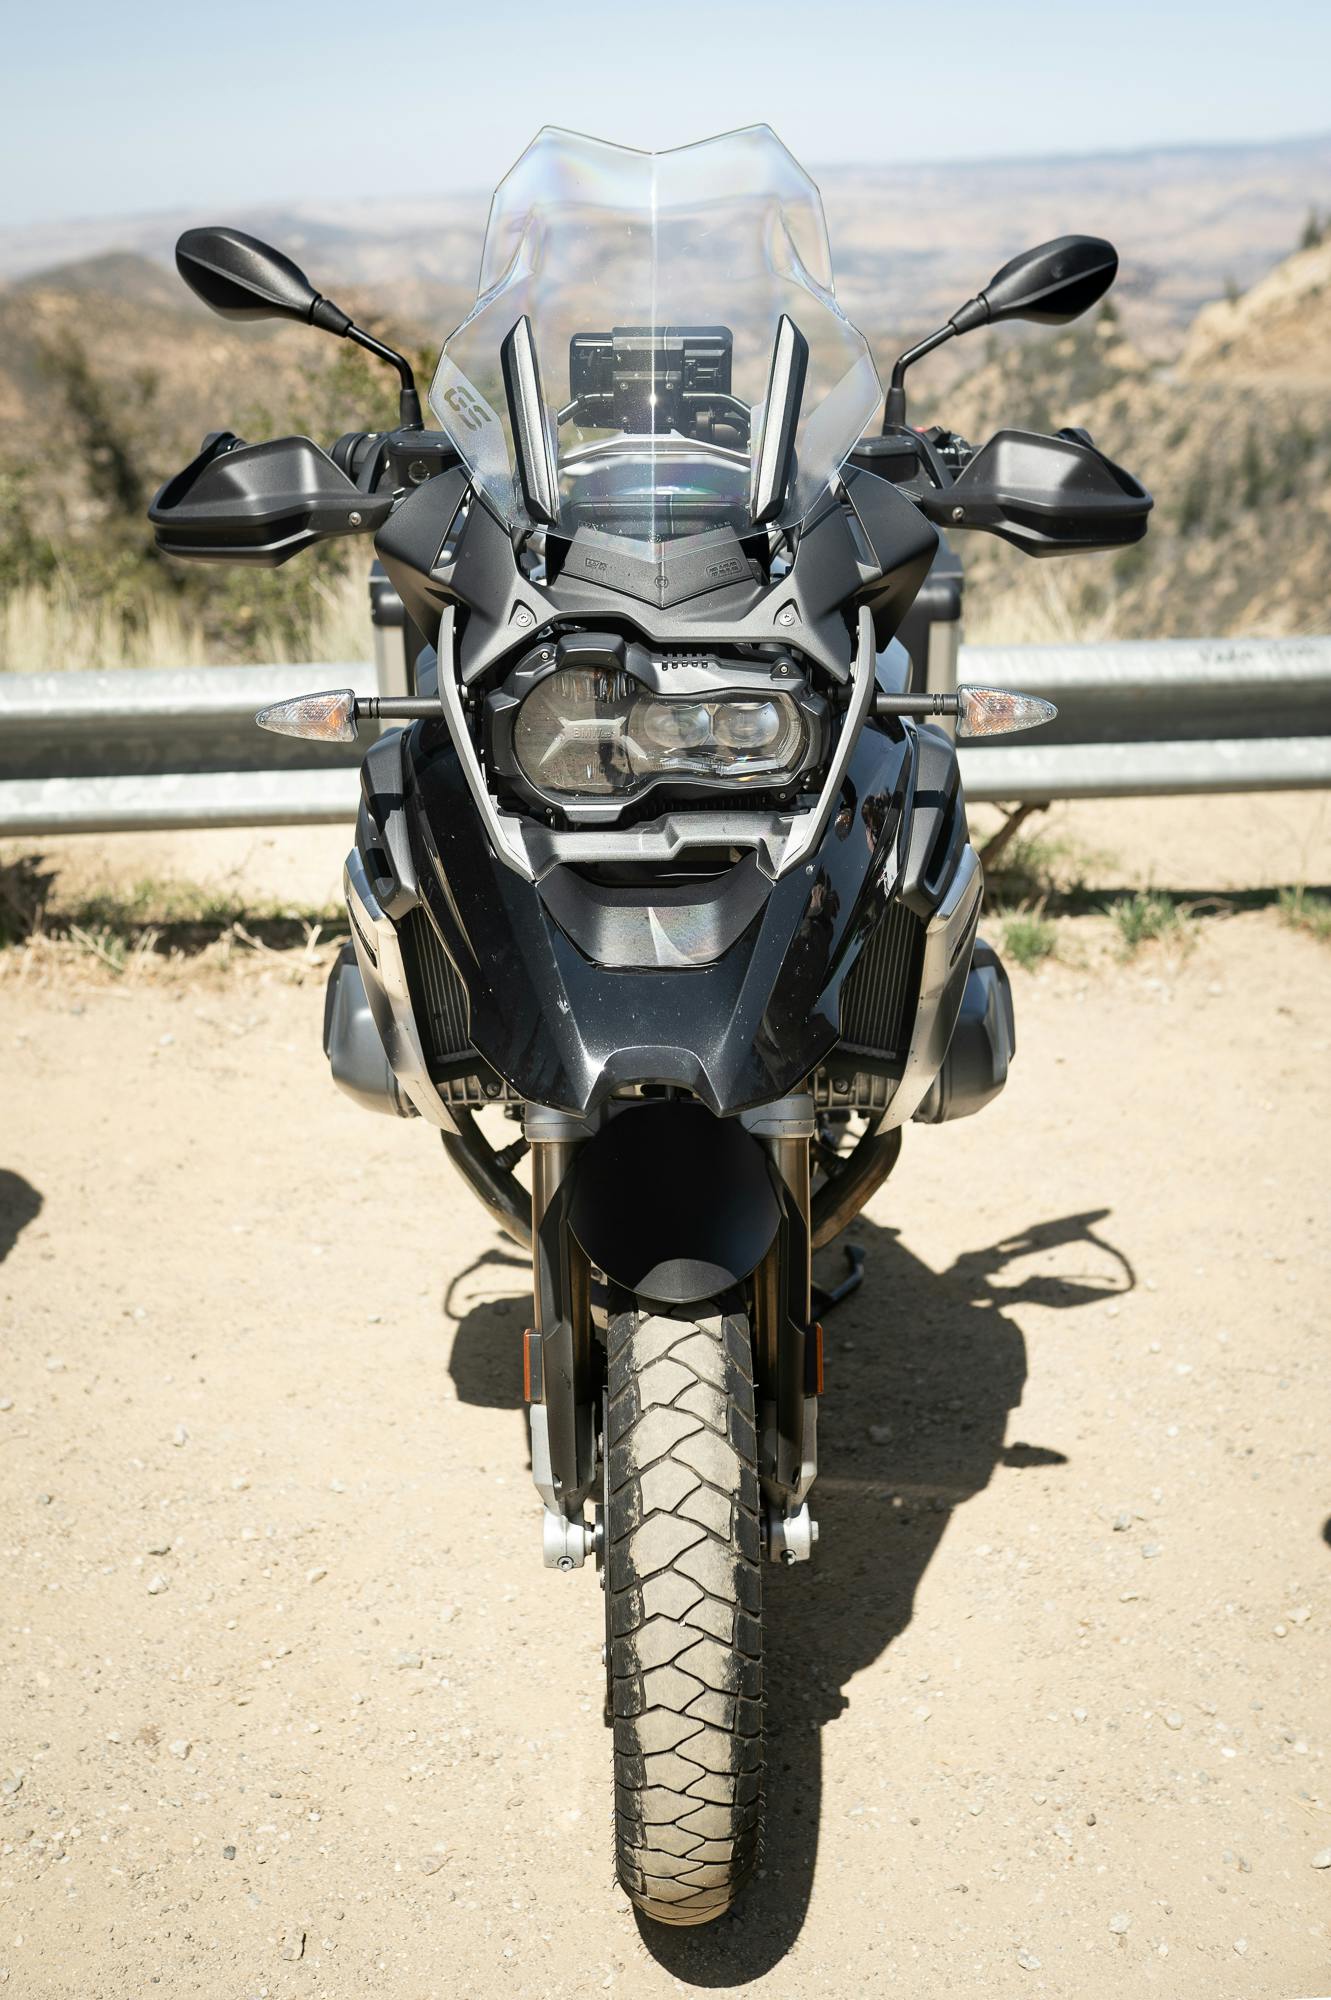 2021 BMW R1250 GS front